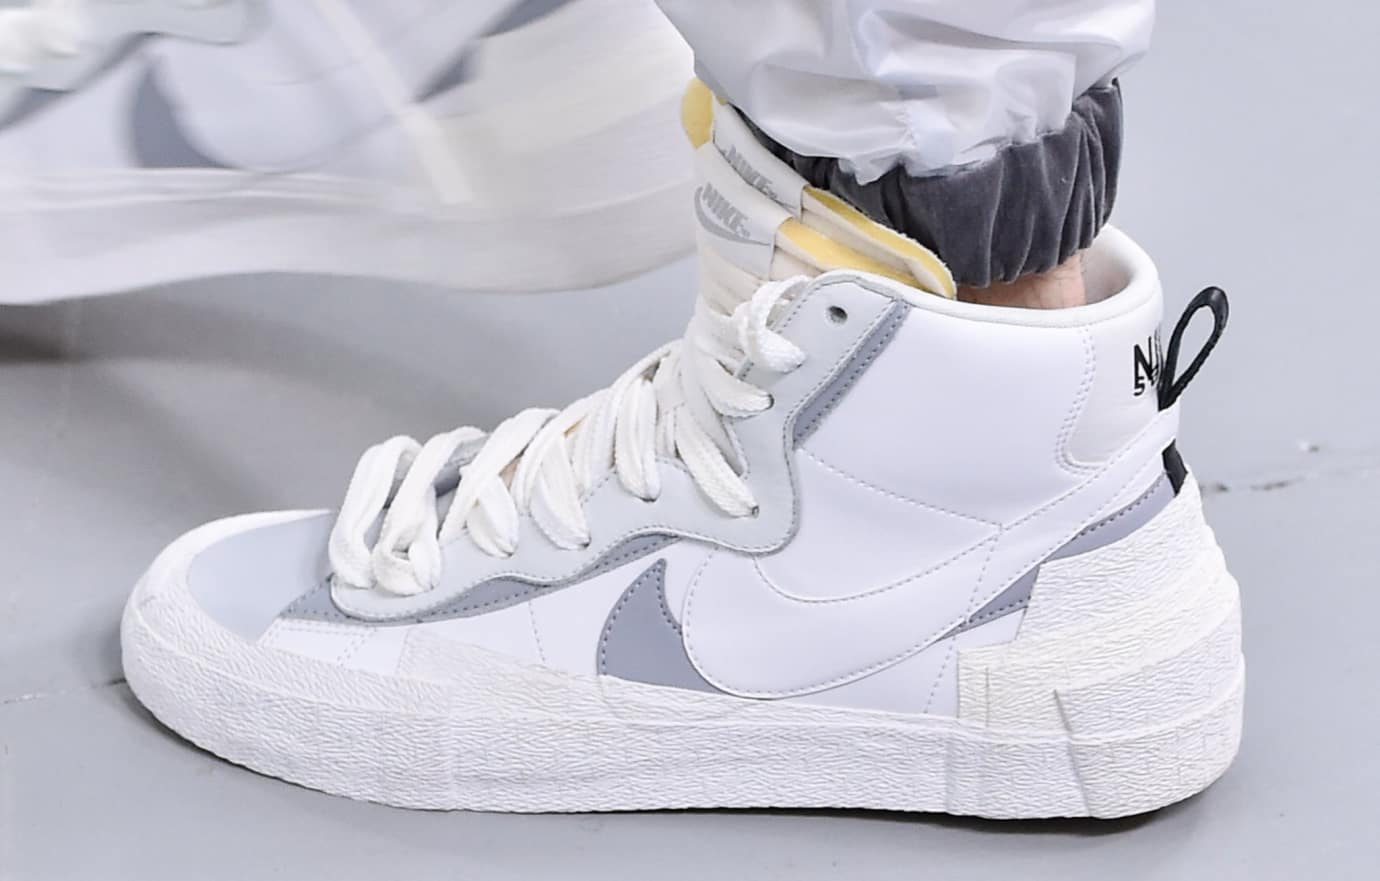 Second Wave of Sacai x Nike Releases to 